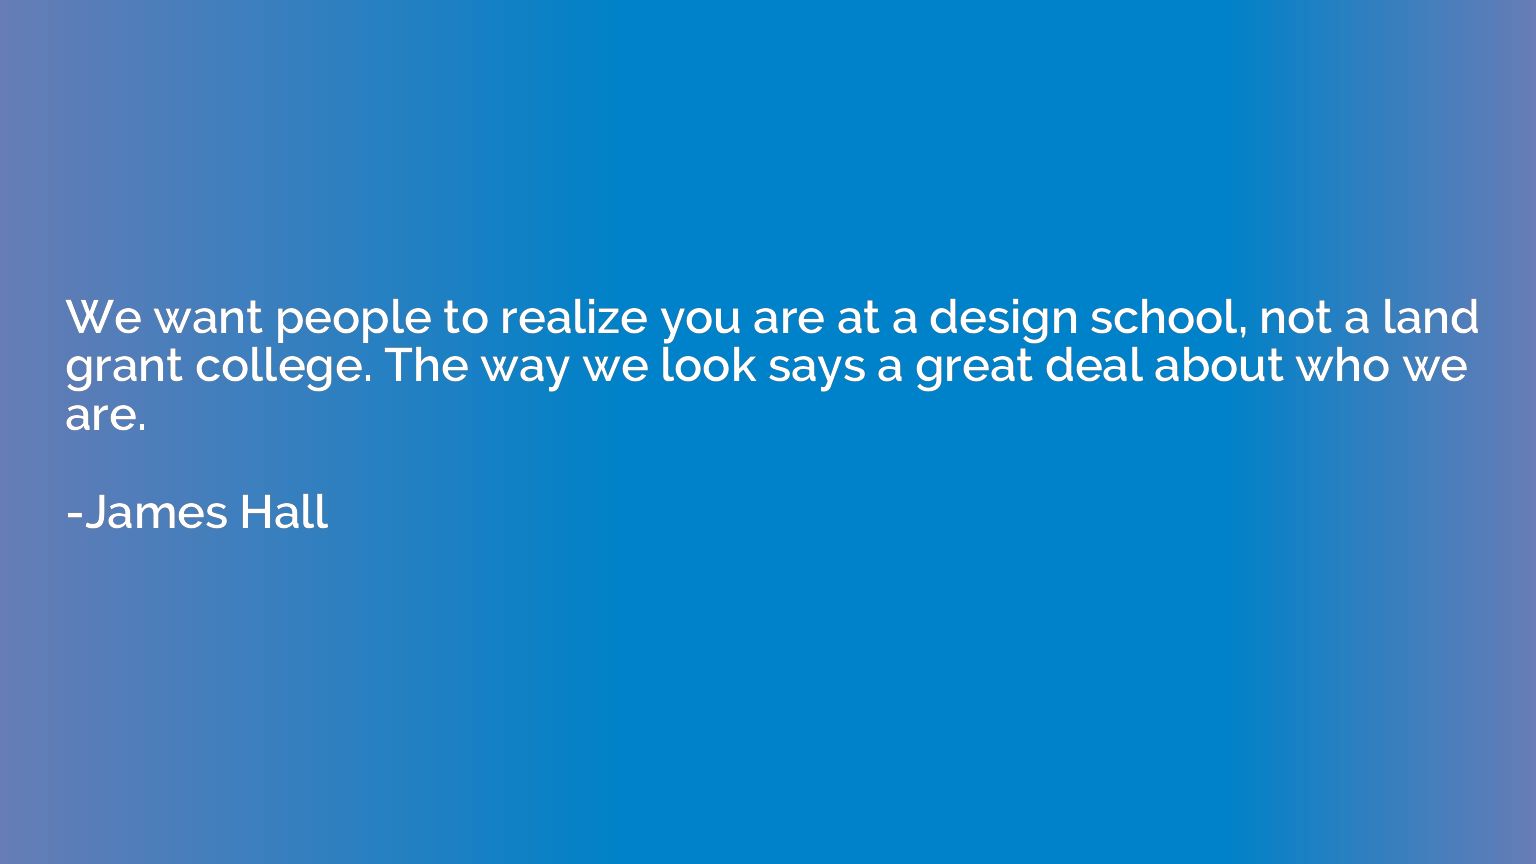 We want people to realize you are at a design school, not a 